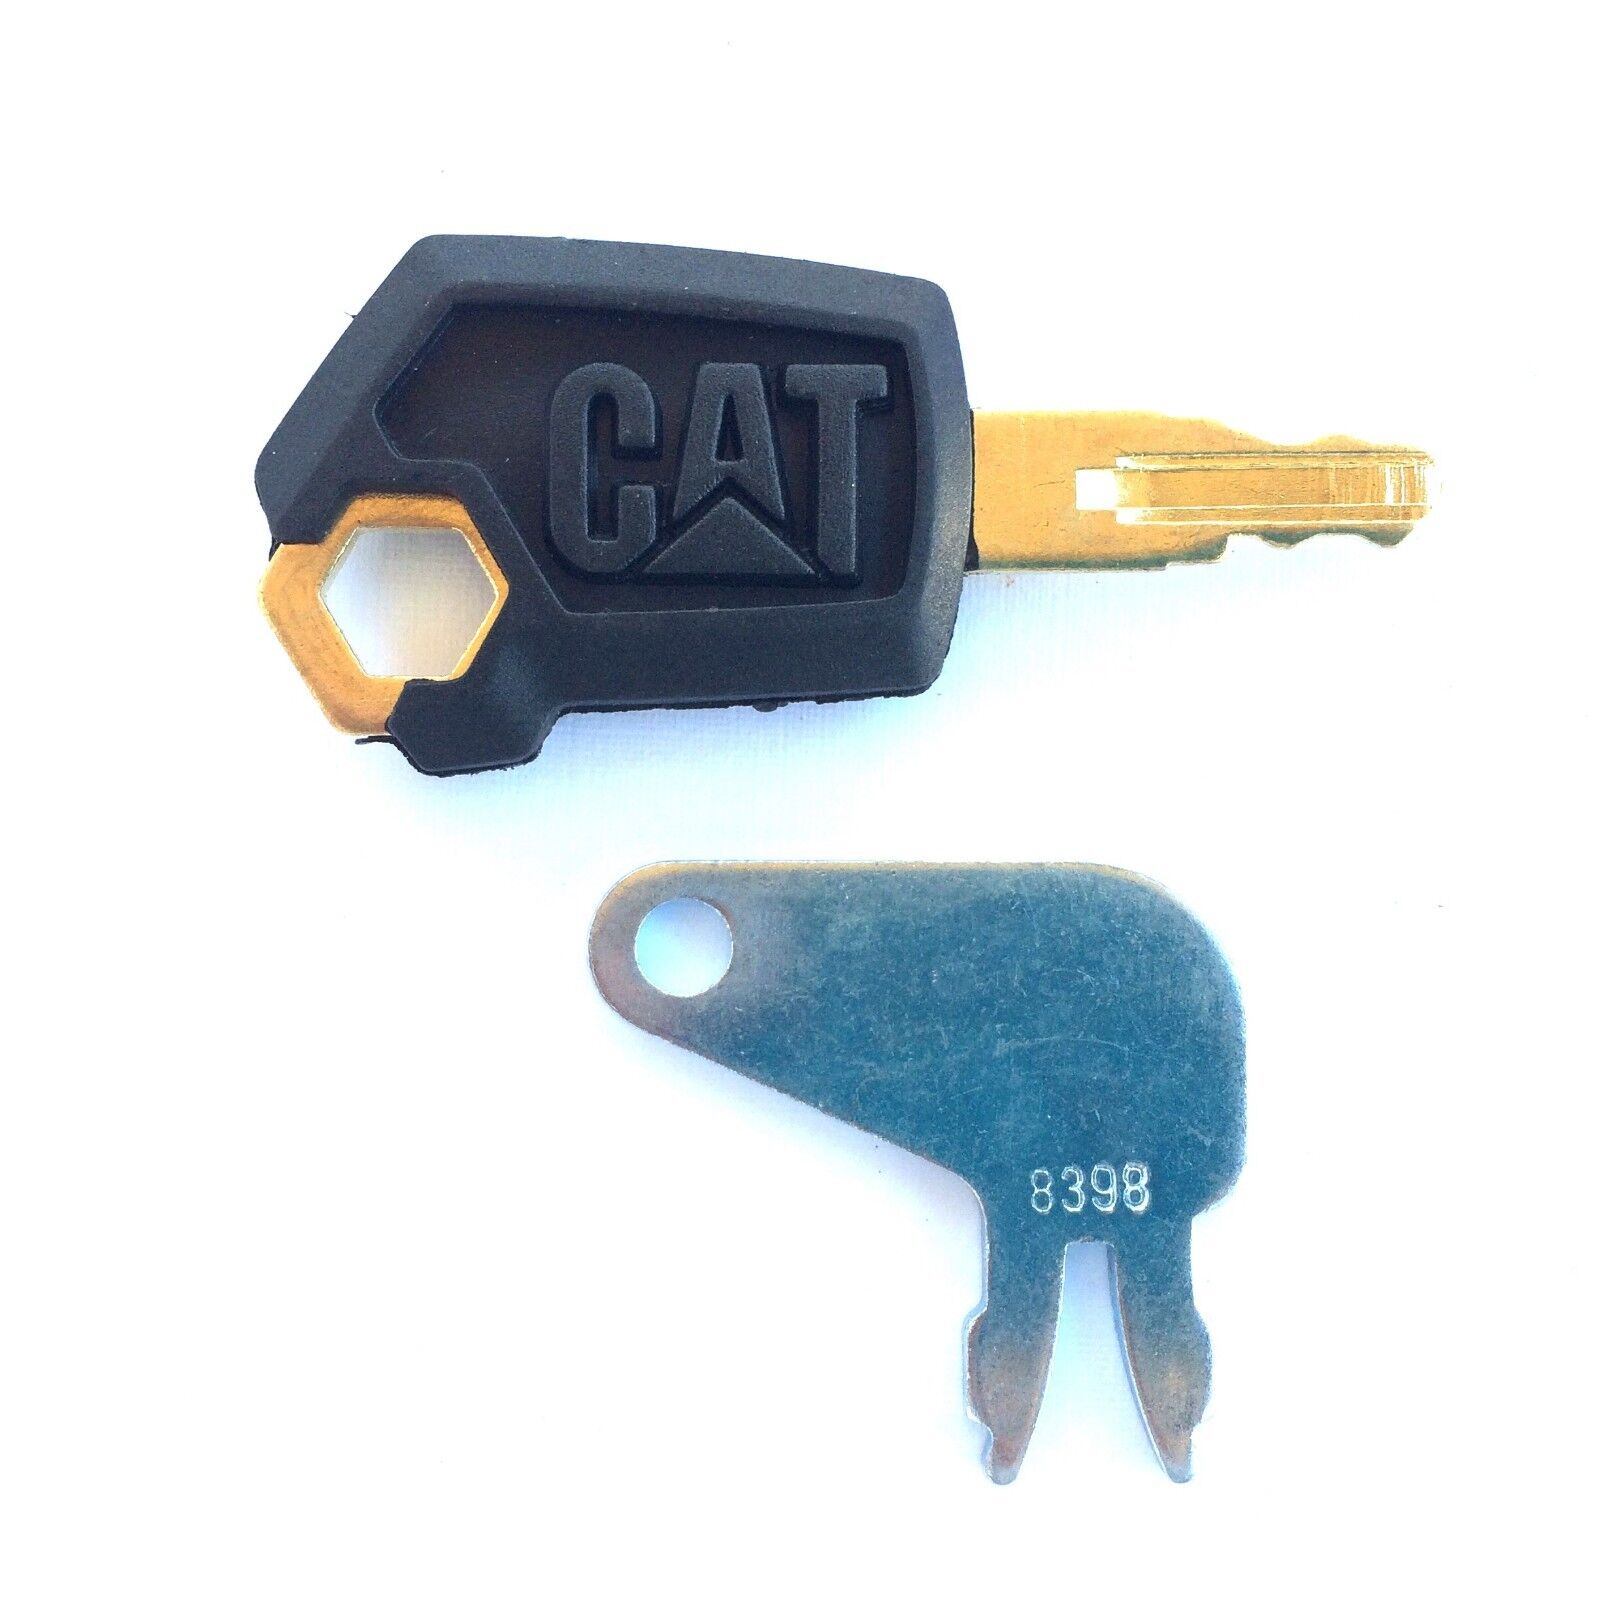 CAT - Caterpillar Equipment Key Set Ignition and Master Disconnect with Logo CAT 8398 & 5P-8500